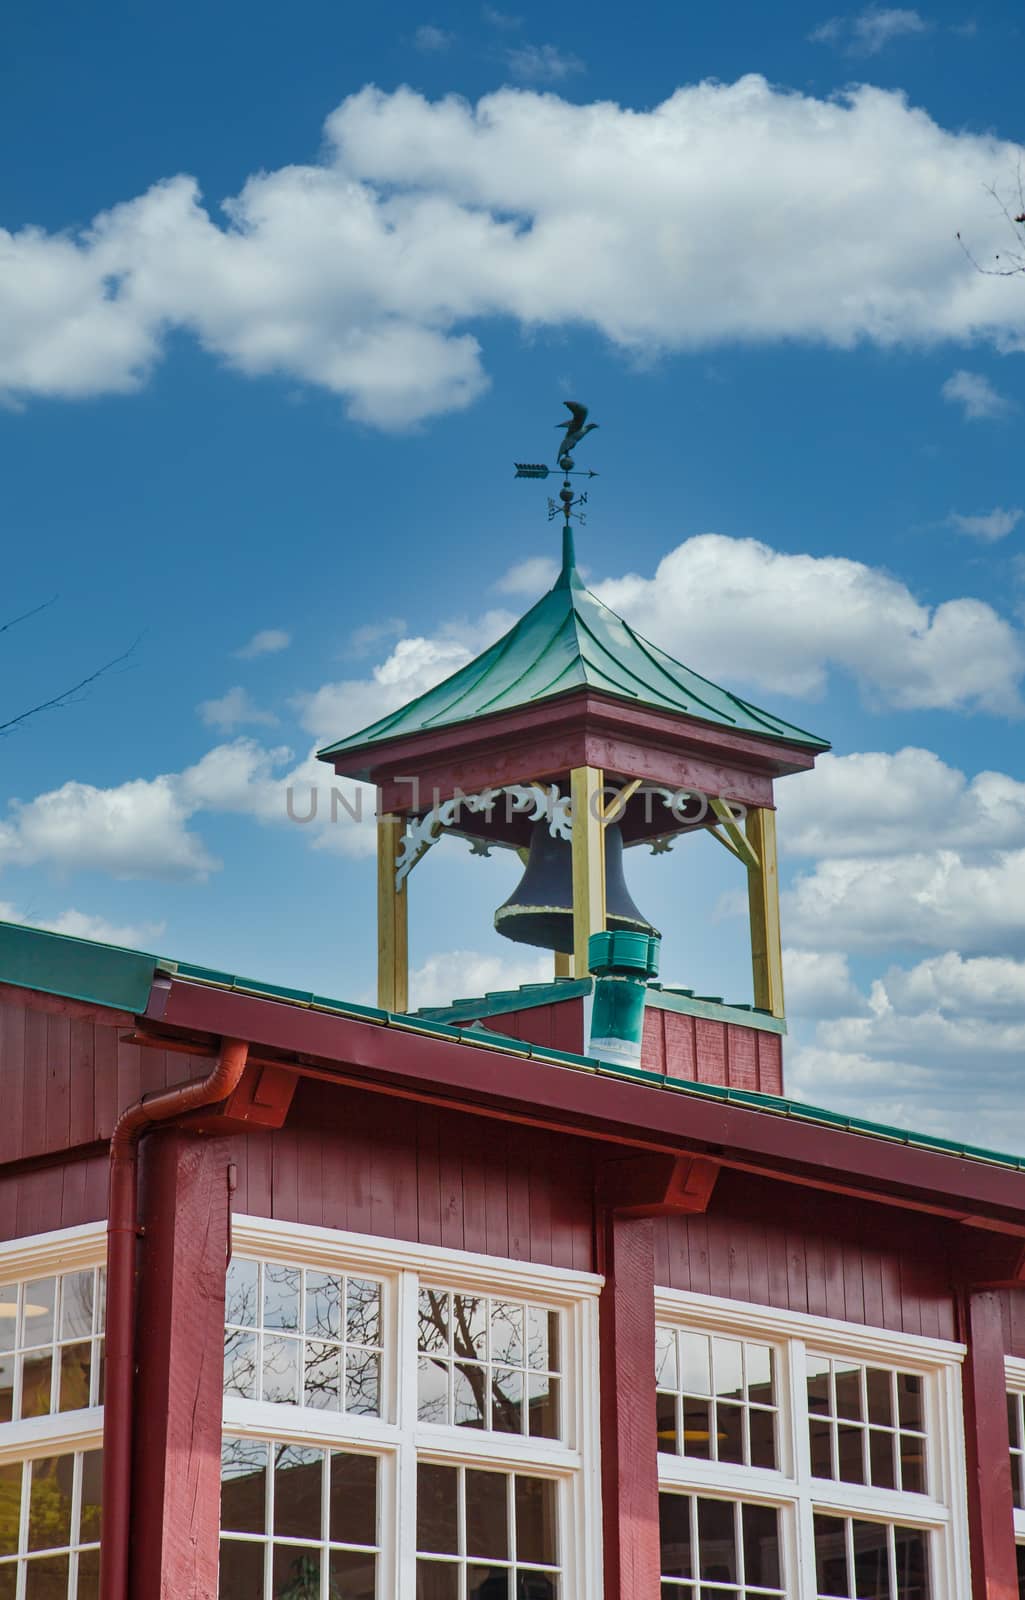 A traditional bell tower and windvane on an old red building